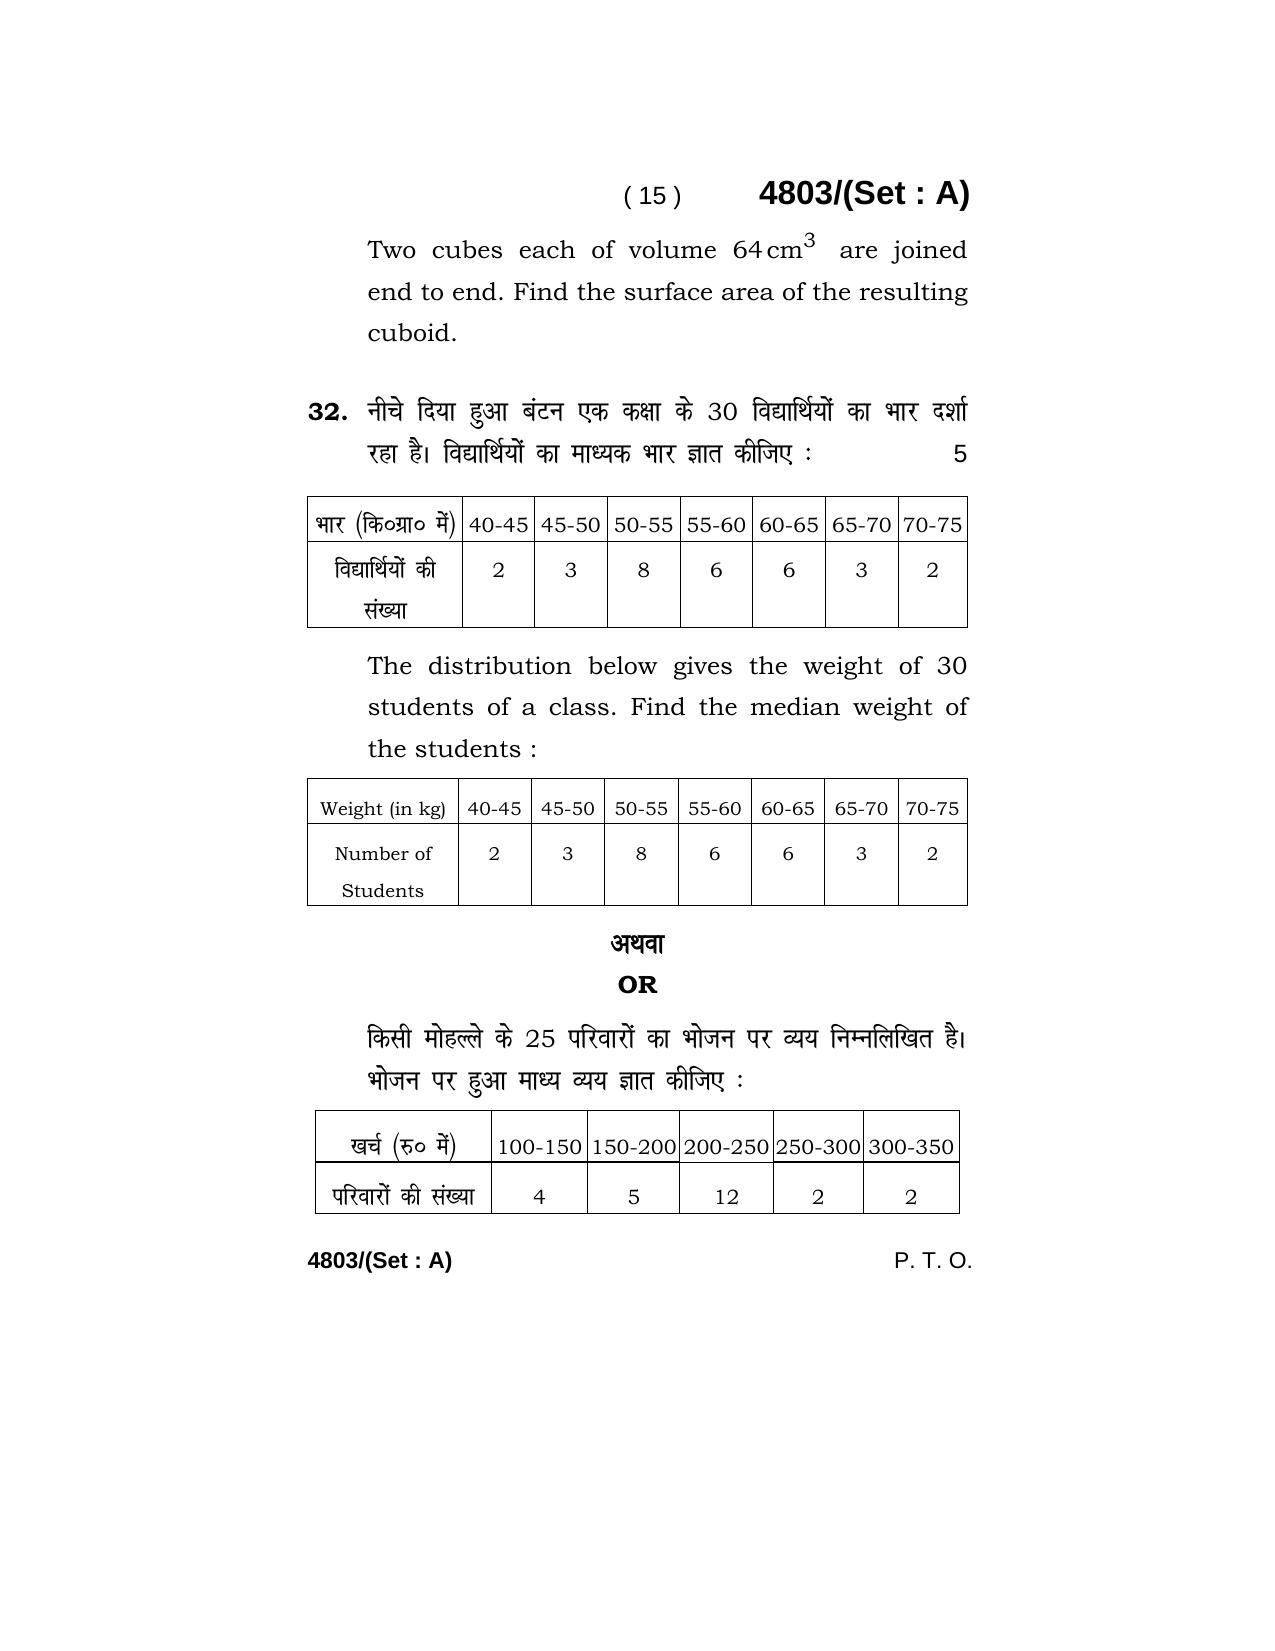 Haryana Board HBSE Class 10 Mathematics 2020 Question Paper - Page 15